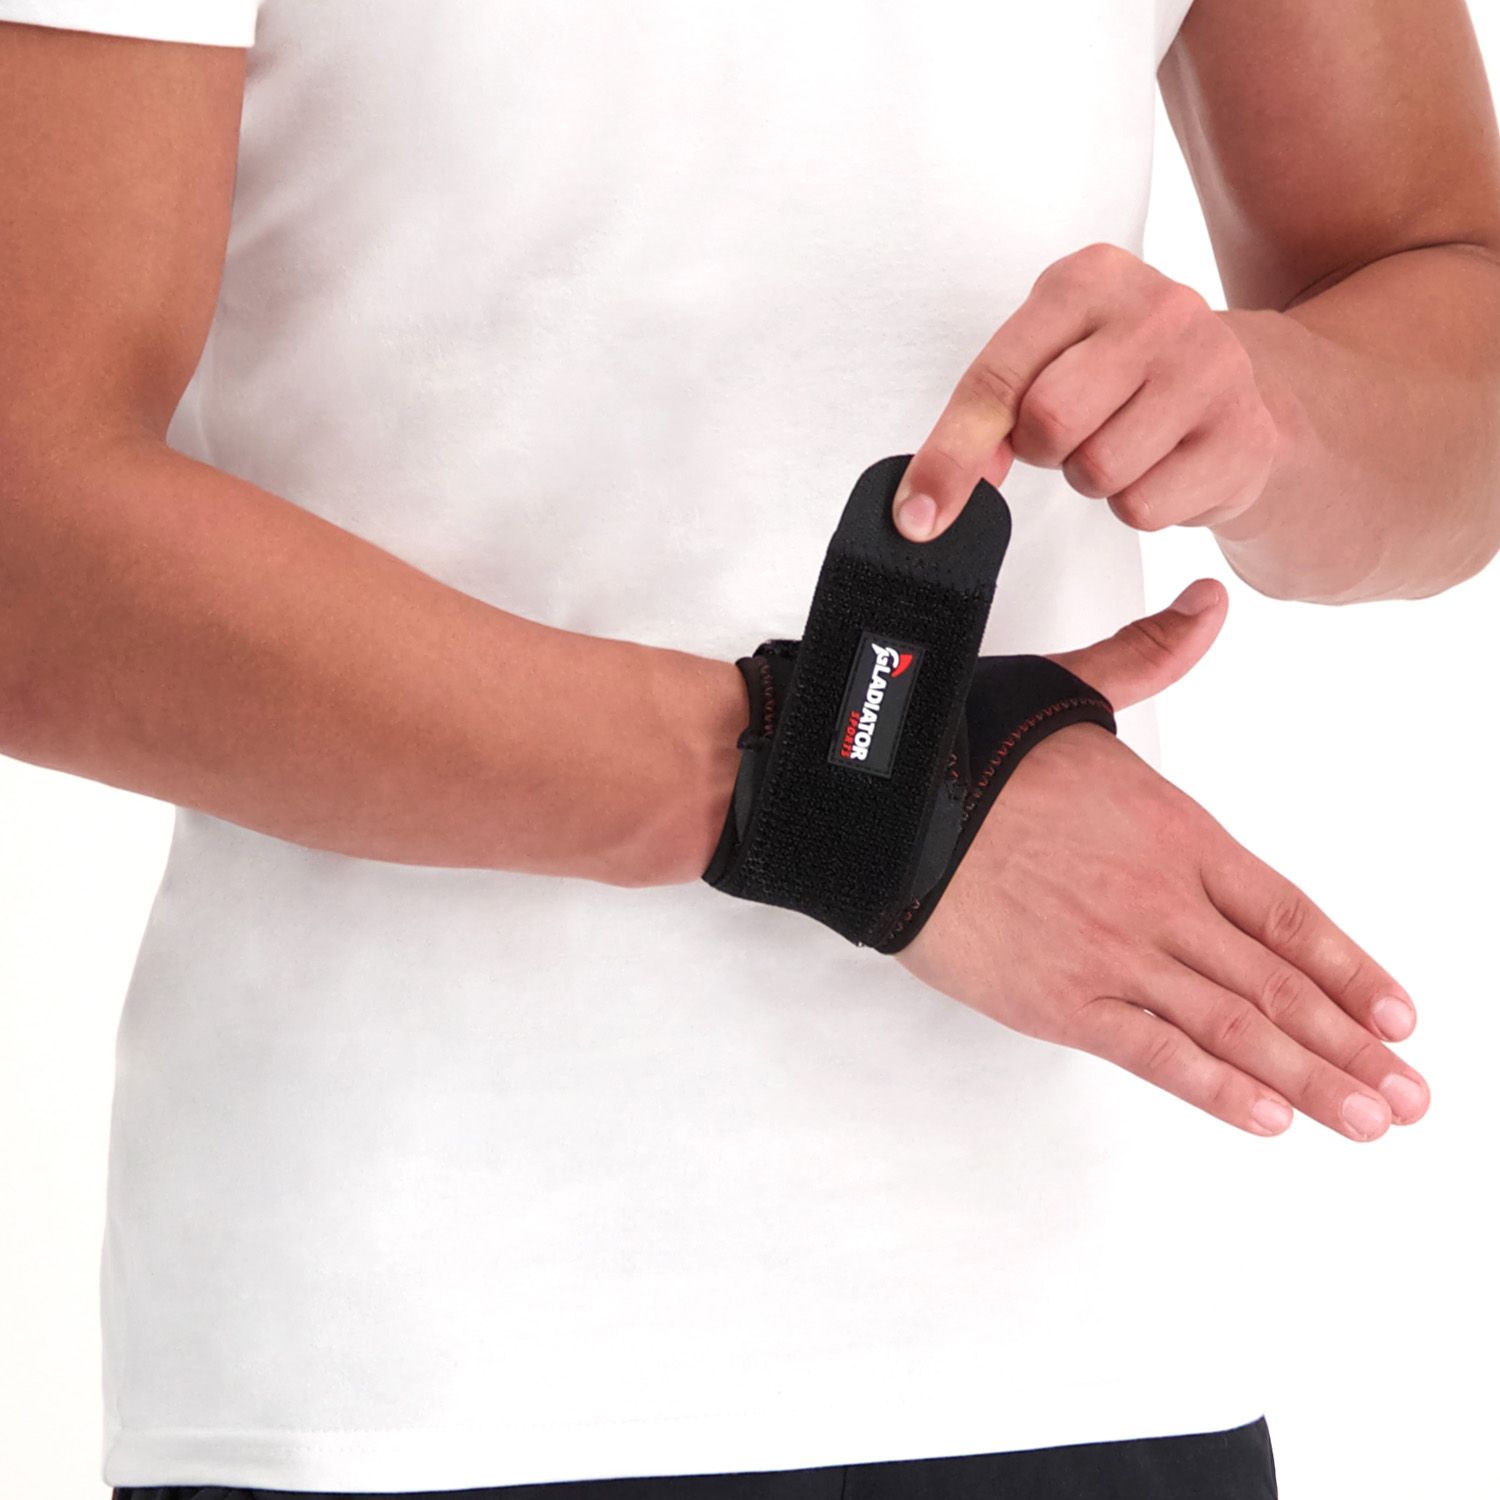 gladiator sports wrist support with thumb opening being put on